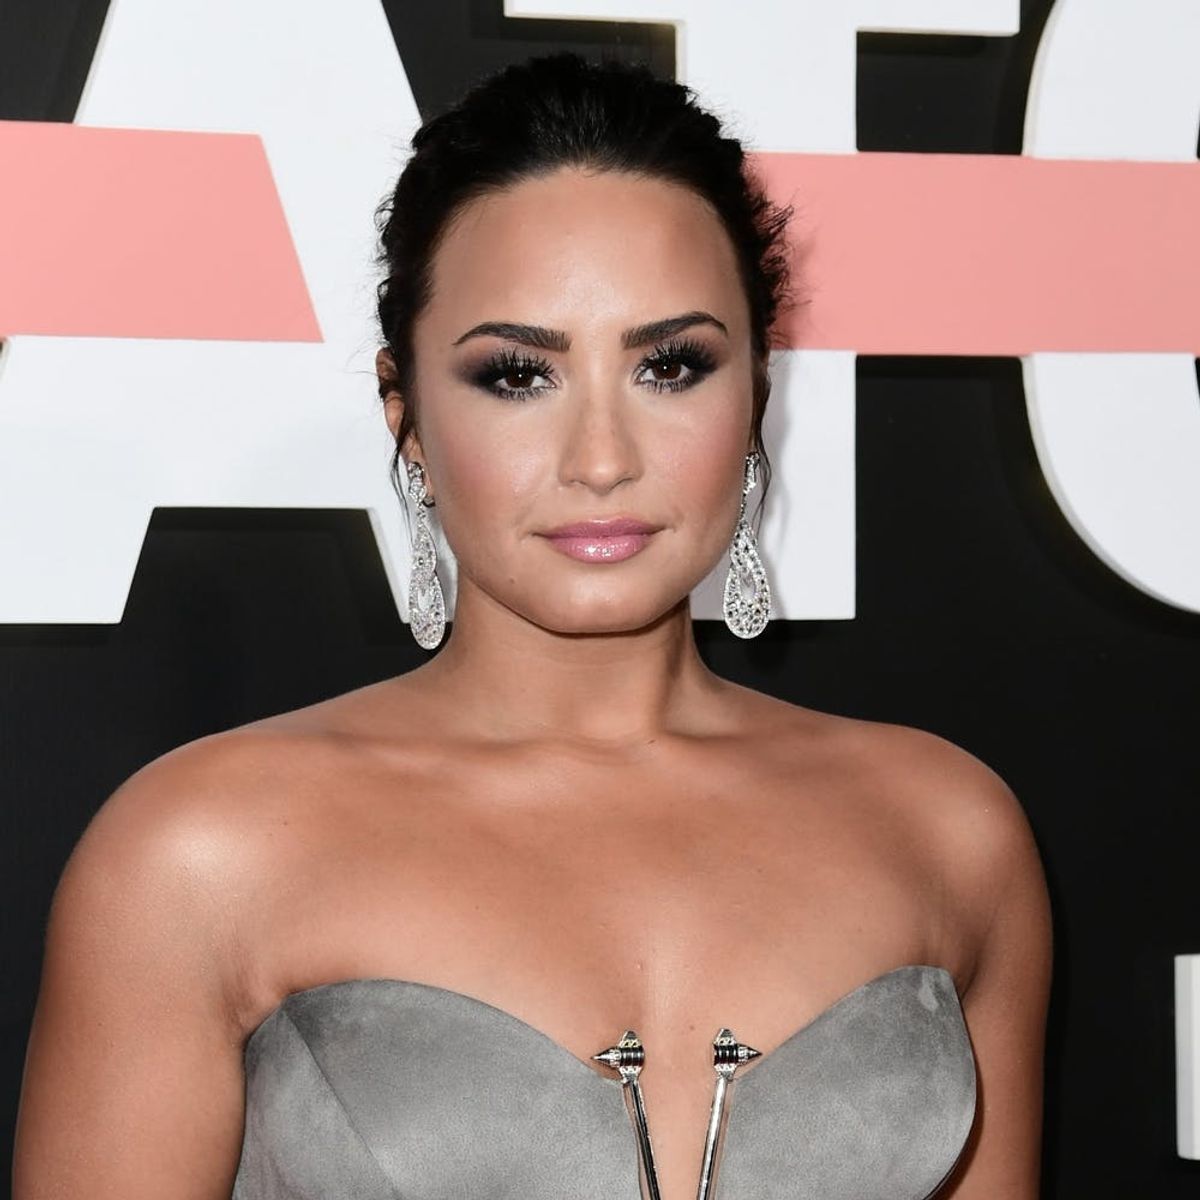 Demi Lovato Shared a Shocking Old Photo That Sends a Powerful Message About Eating Disorder Recovery